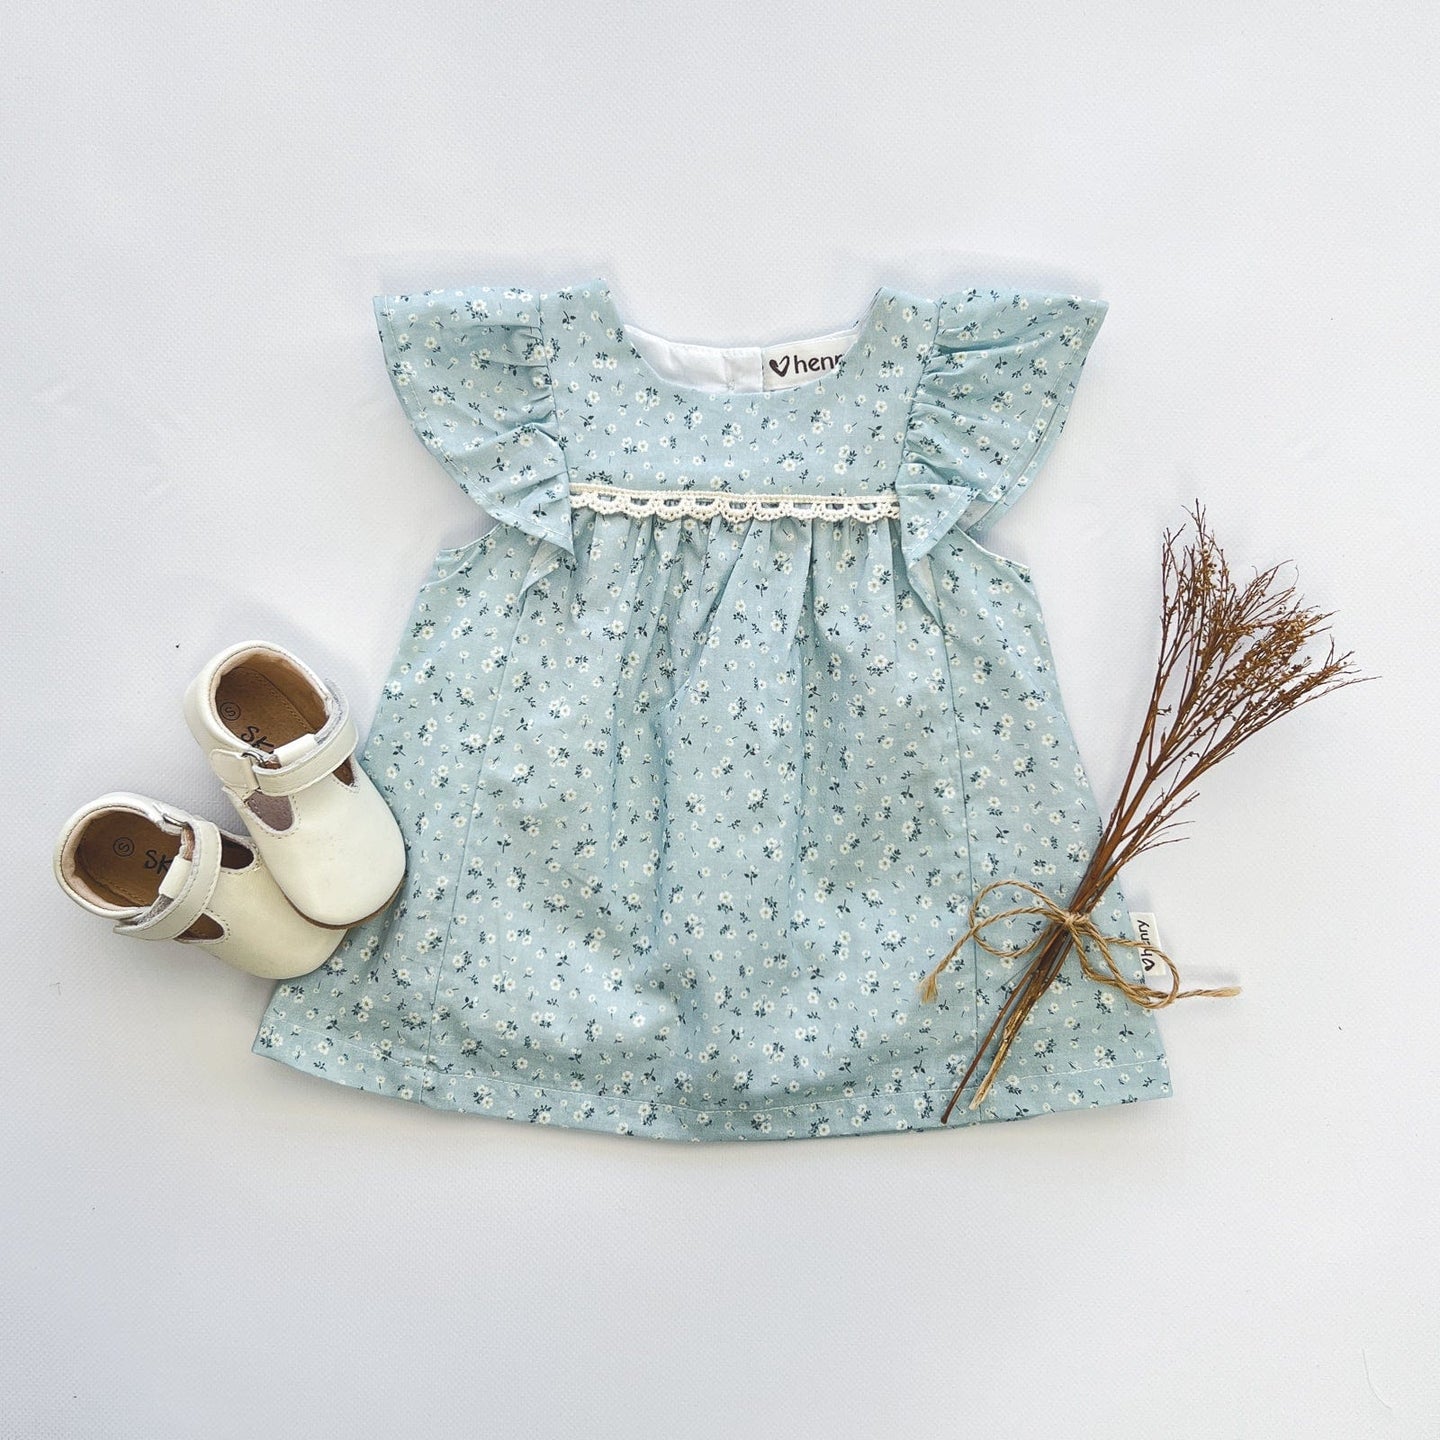 White Cotton Lace Fabric Princess Baby Baptism Dress For Newborn Girls  Perfect For 1st Birthday And 0 6 Month Olds 210315 From Jiao08, $10.58 |  DHgate.Com